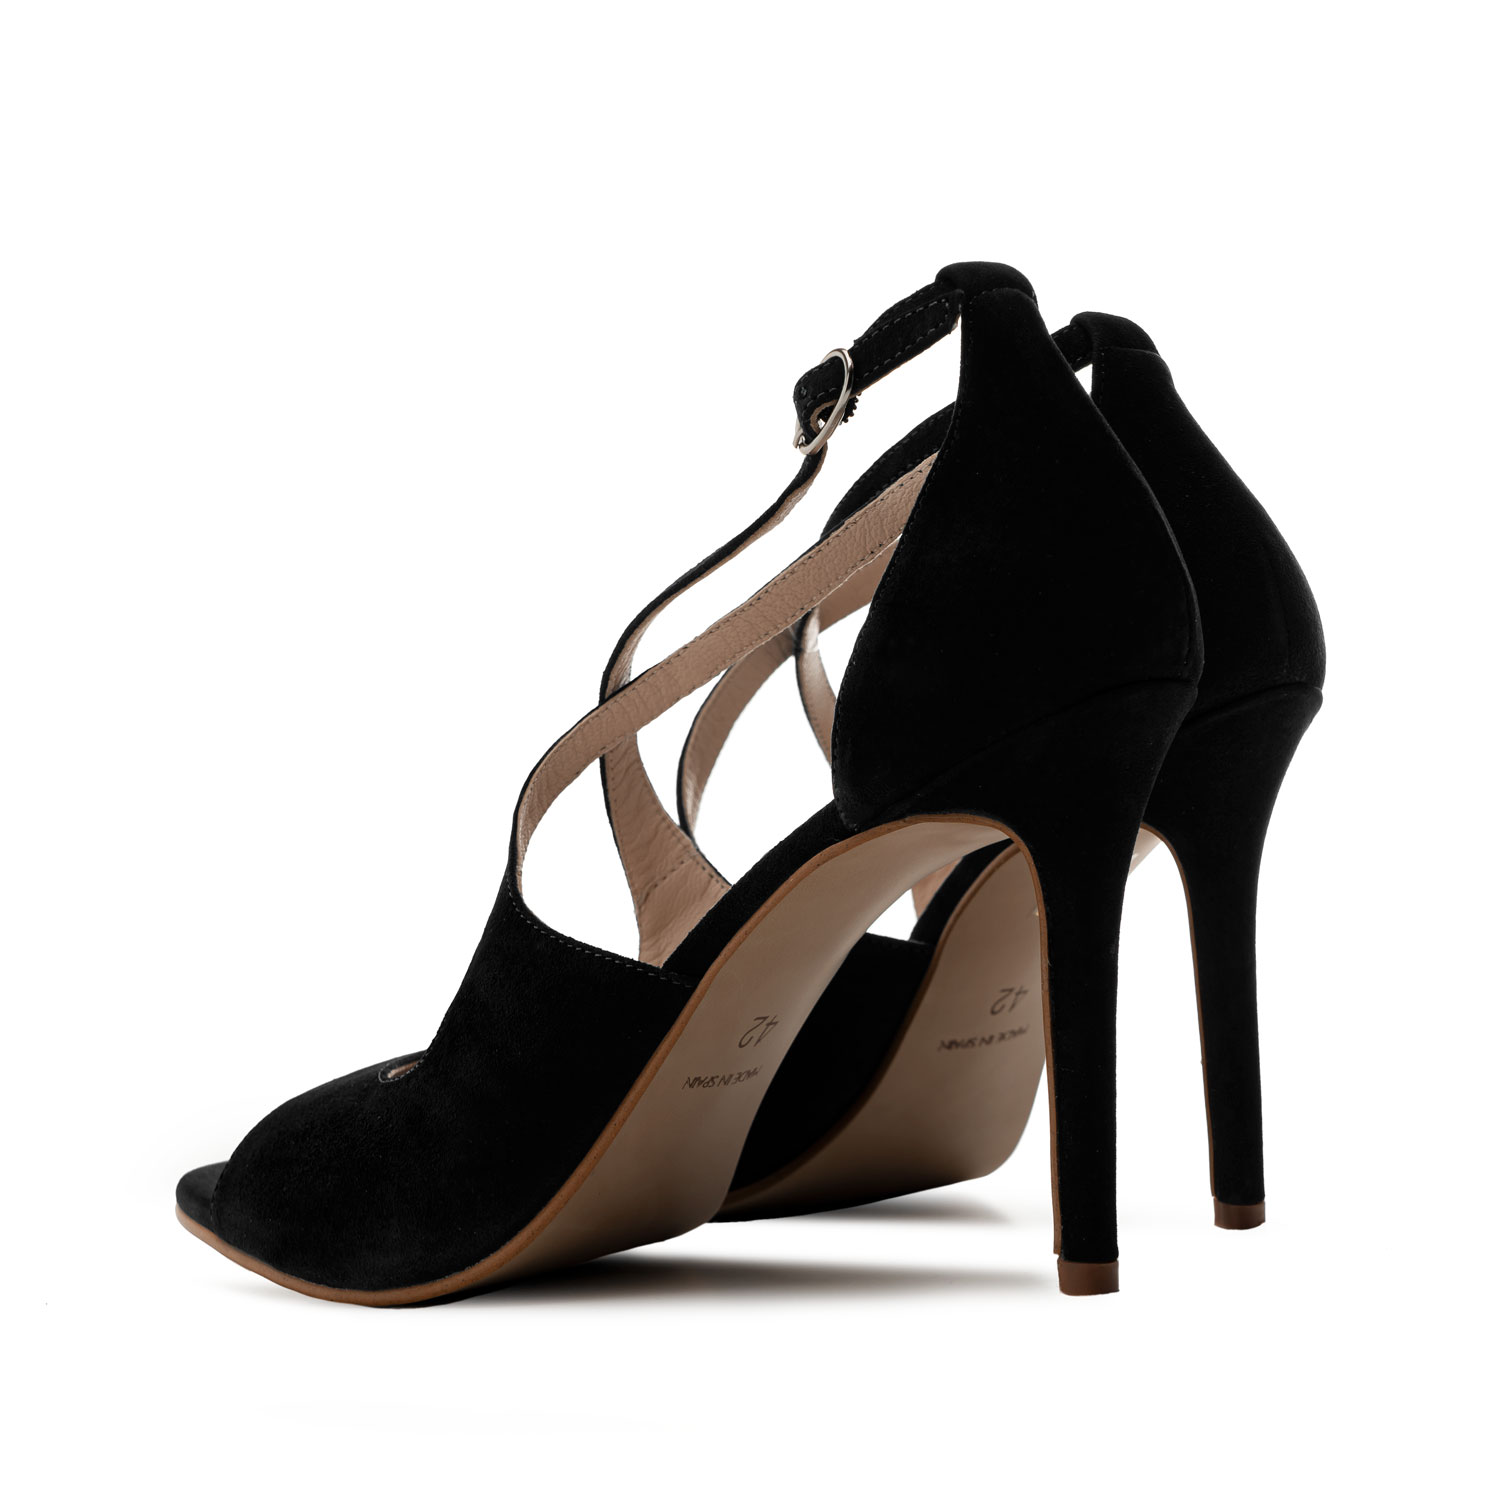 Stiletto Crossed Sandals in Black Suede Leather 